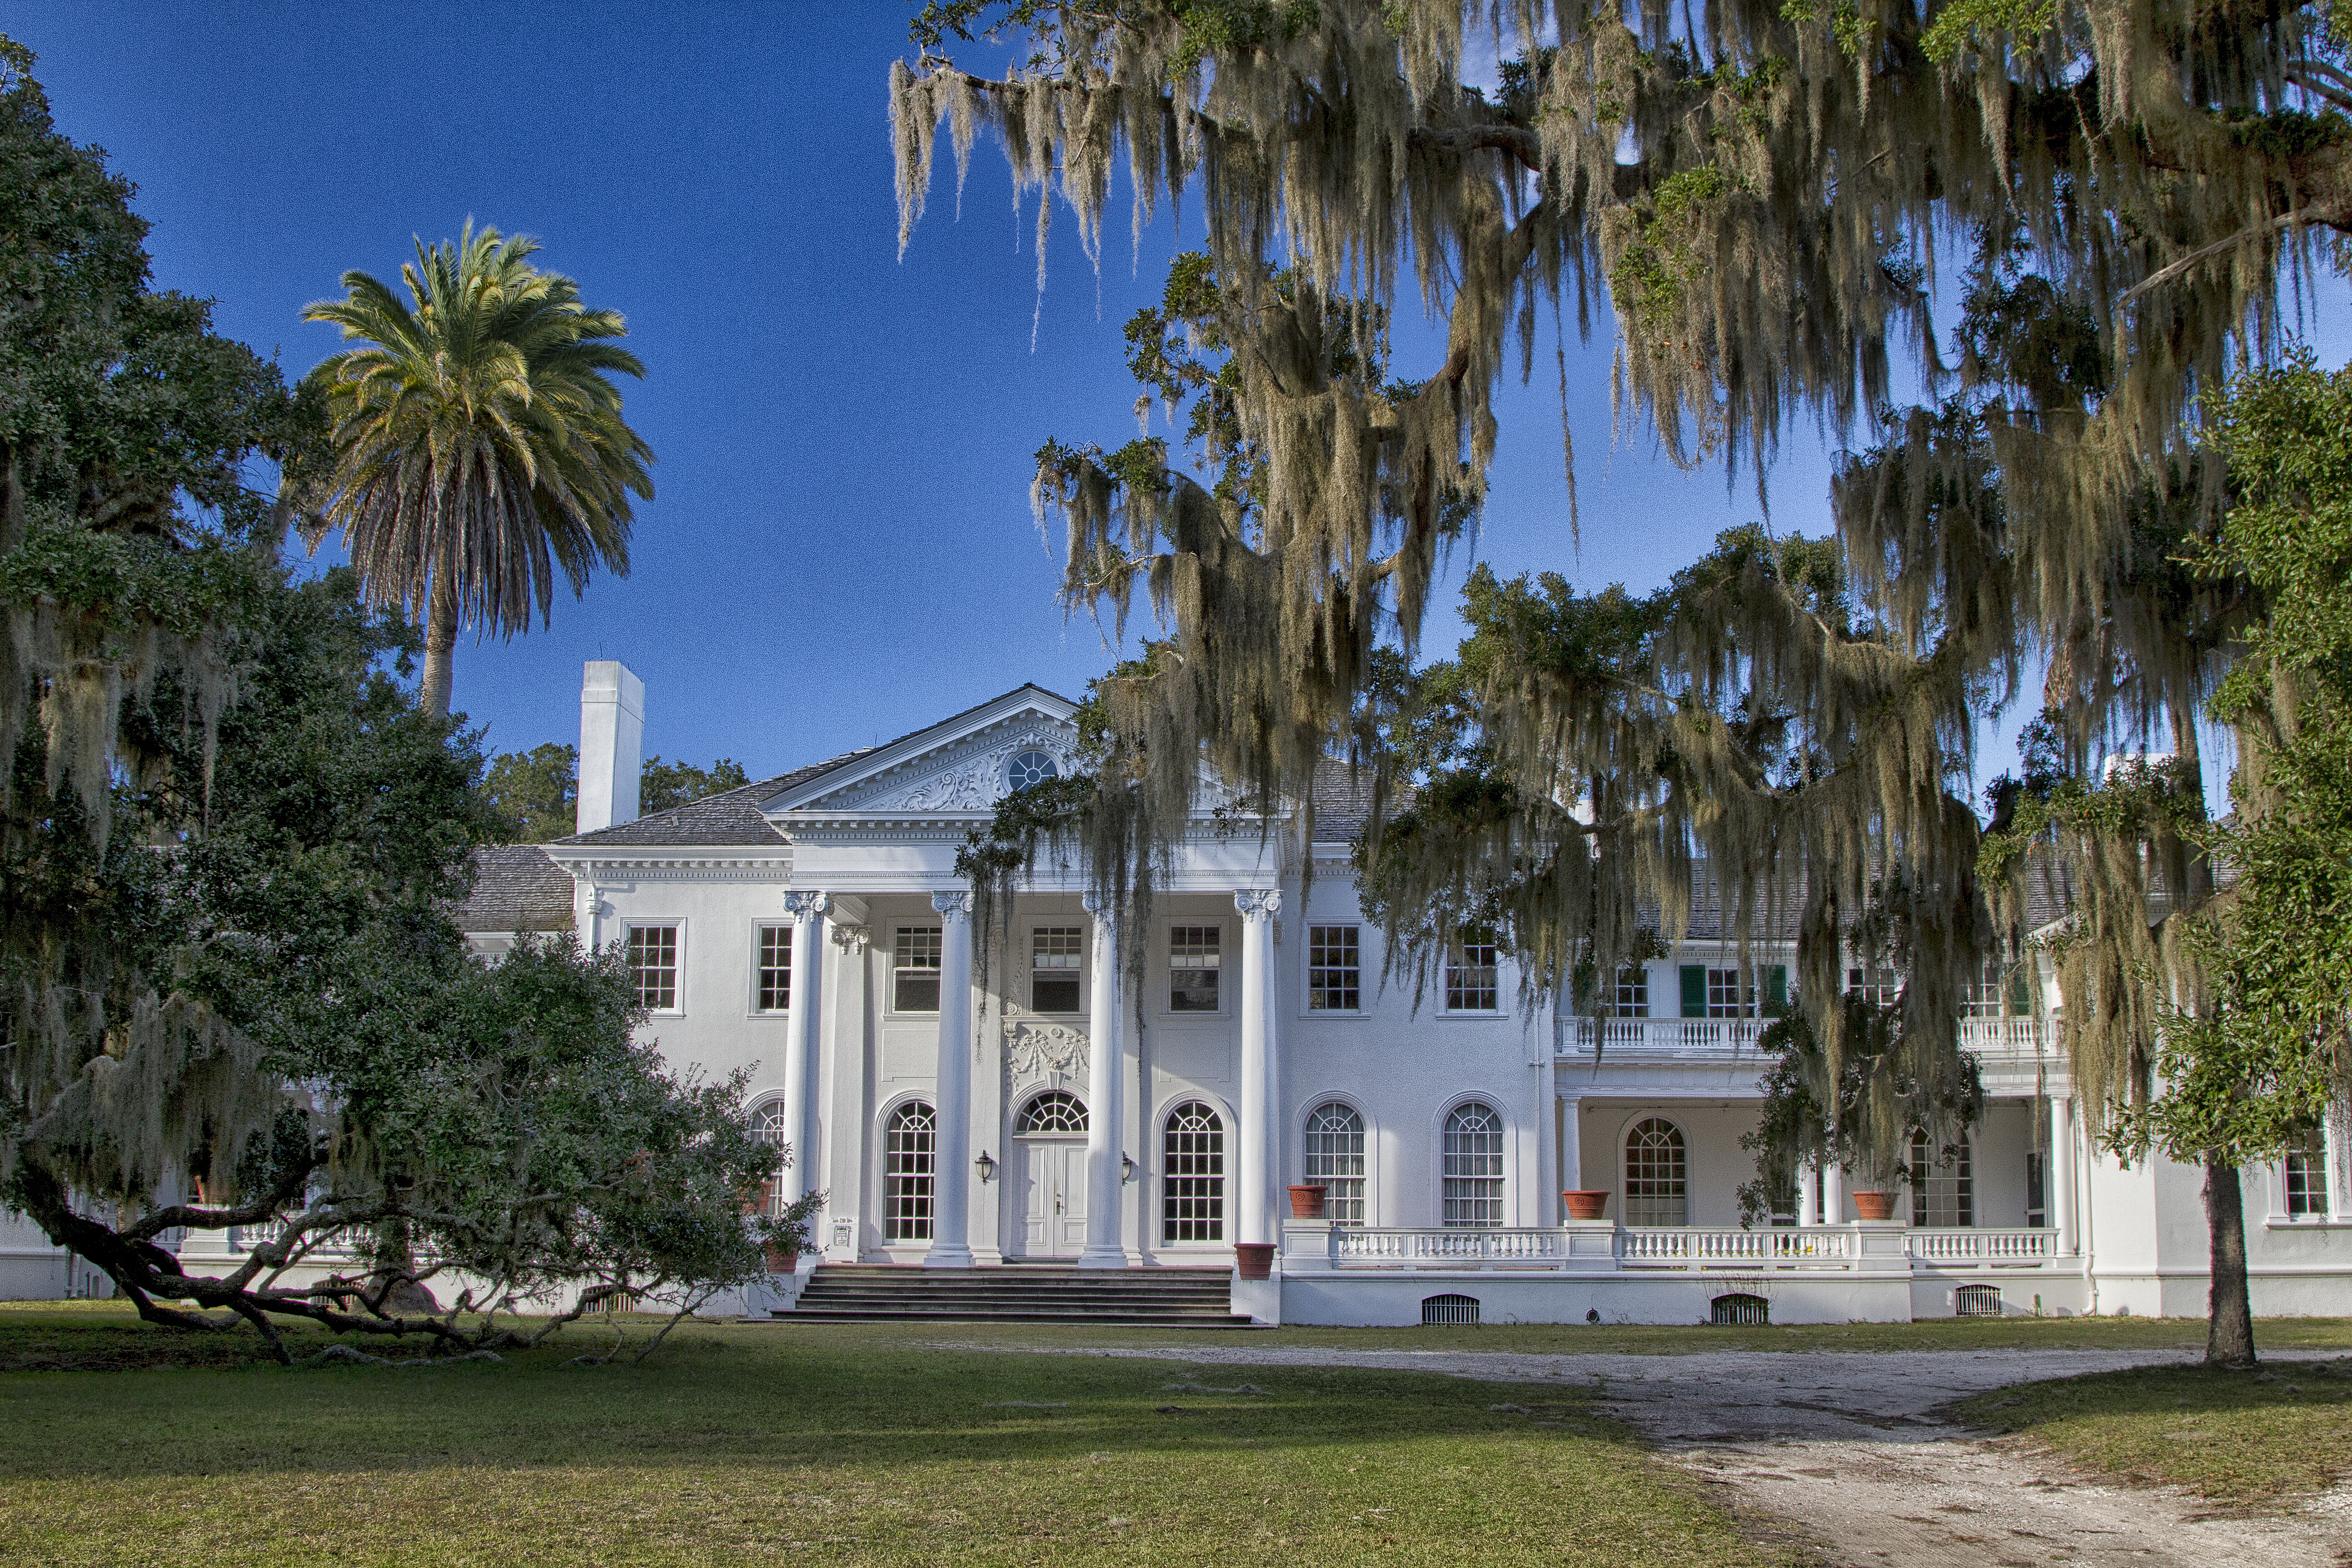 large, white mansion behind oak trees draped with Spanish Moss